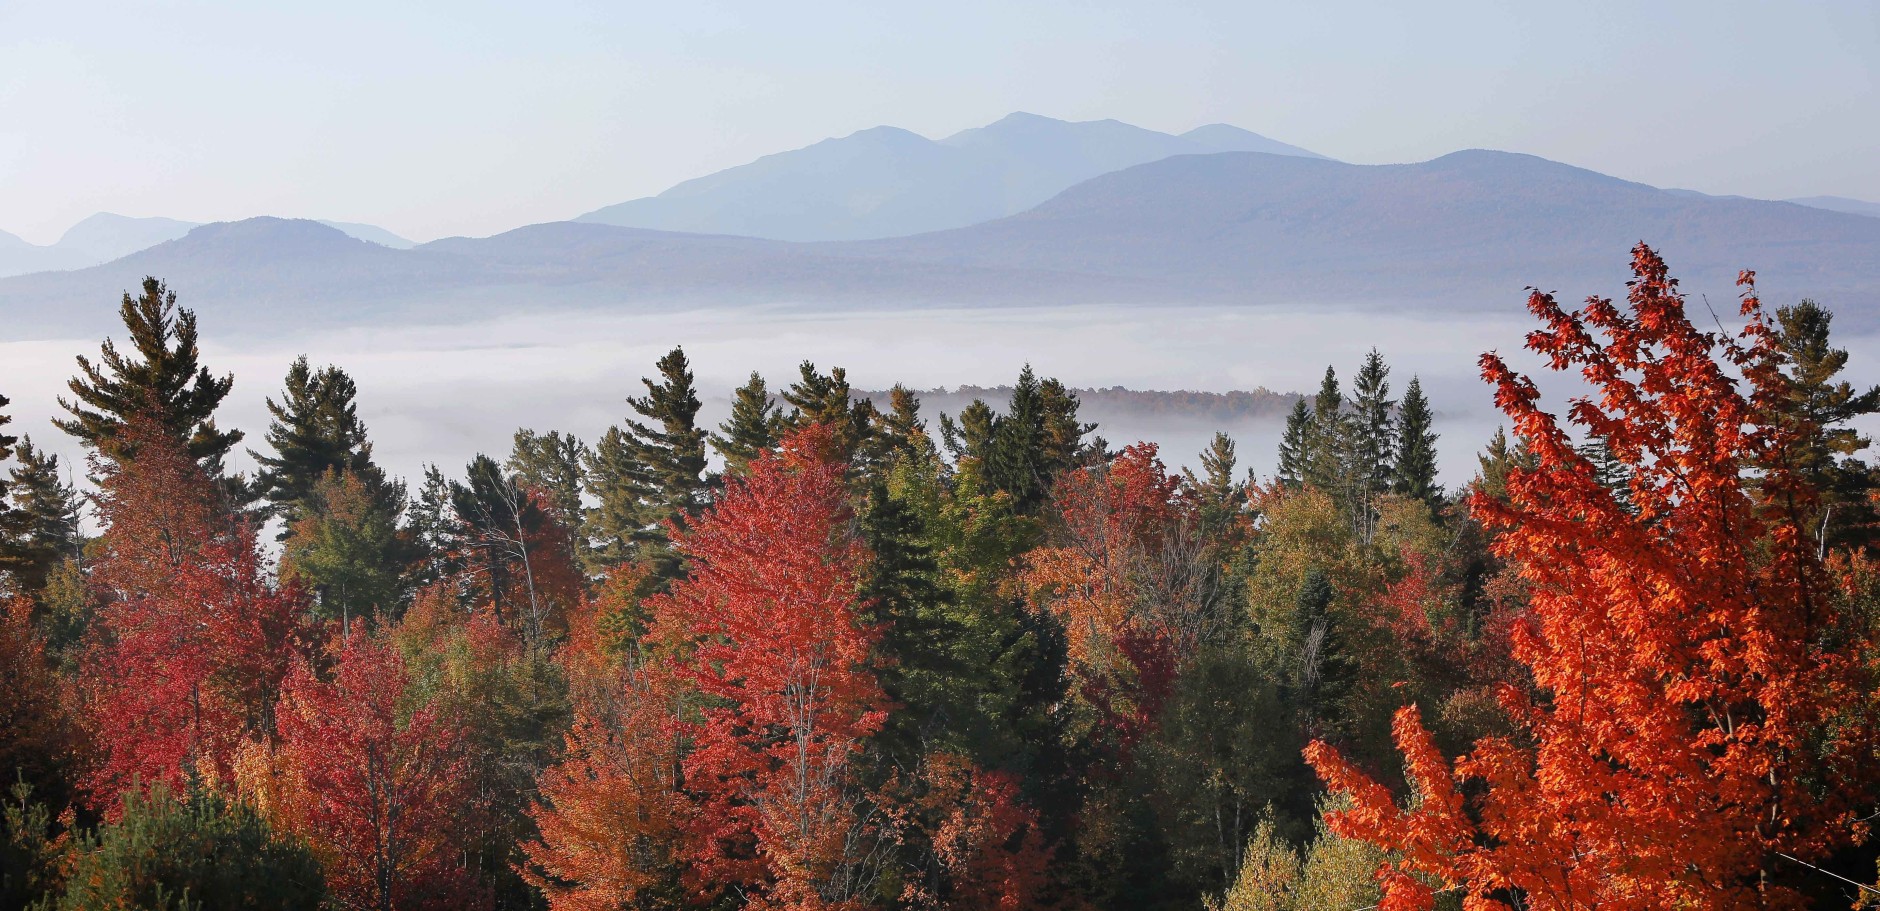 FILE - In this Sept. 28, 2014, file photo, fog sits in the valley of the White Mountains as leaves change colors from Milan Hill in Milan, N.H. (AP Photo/Jim Cole, File)